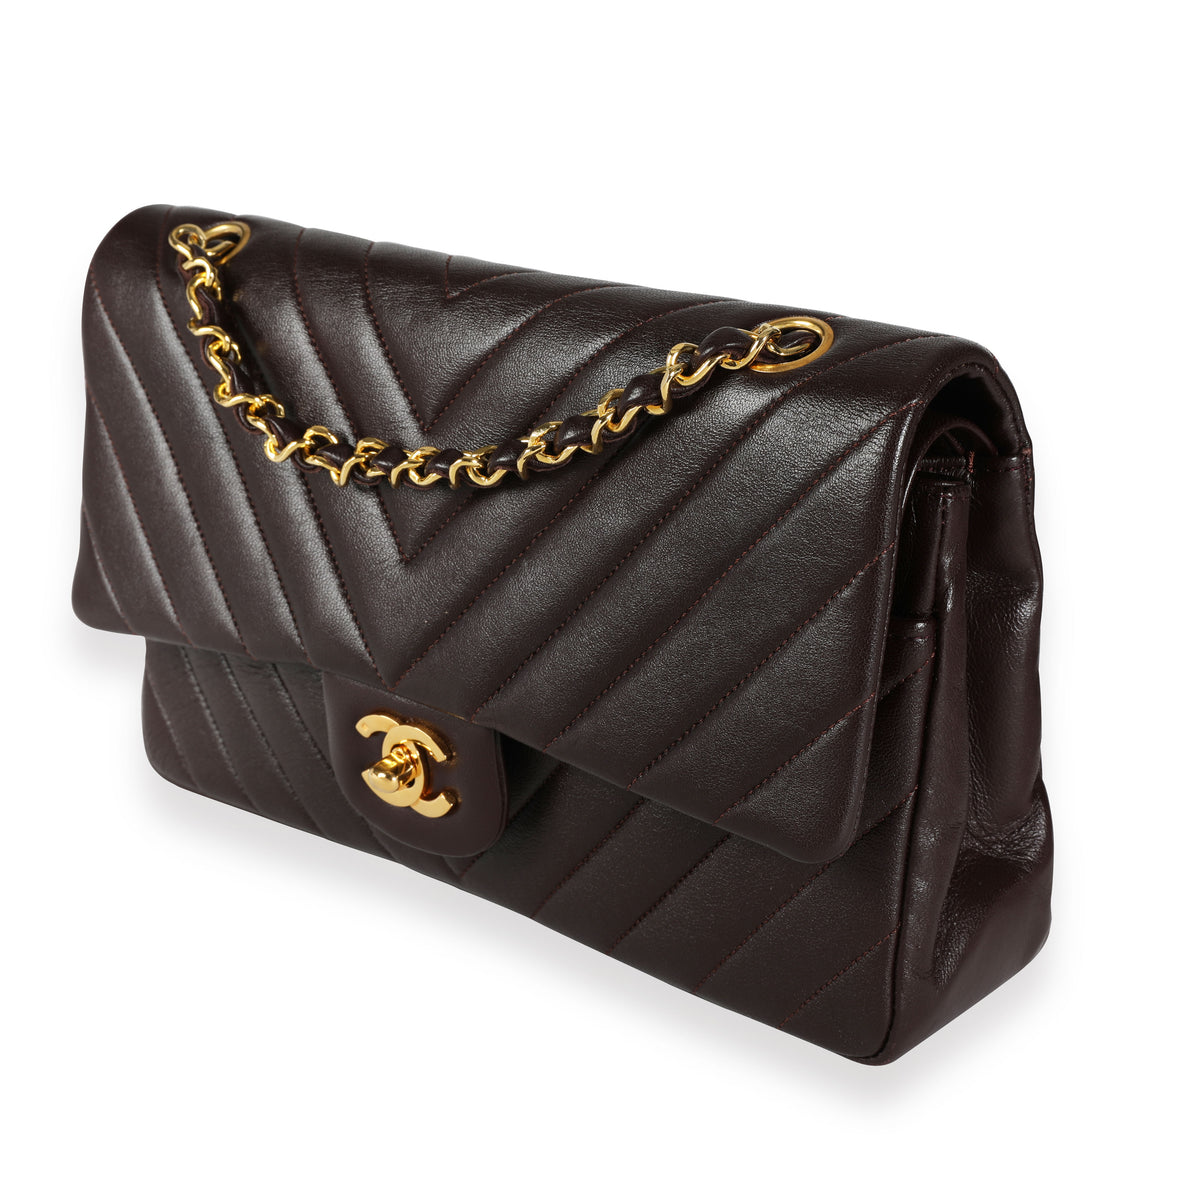 Chanel Vintage Medium Double Flap Bag in Black Chevron Quilted Lambskin -  SOLD